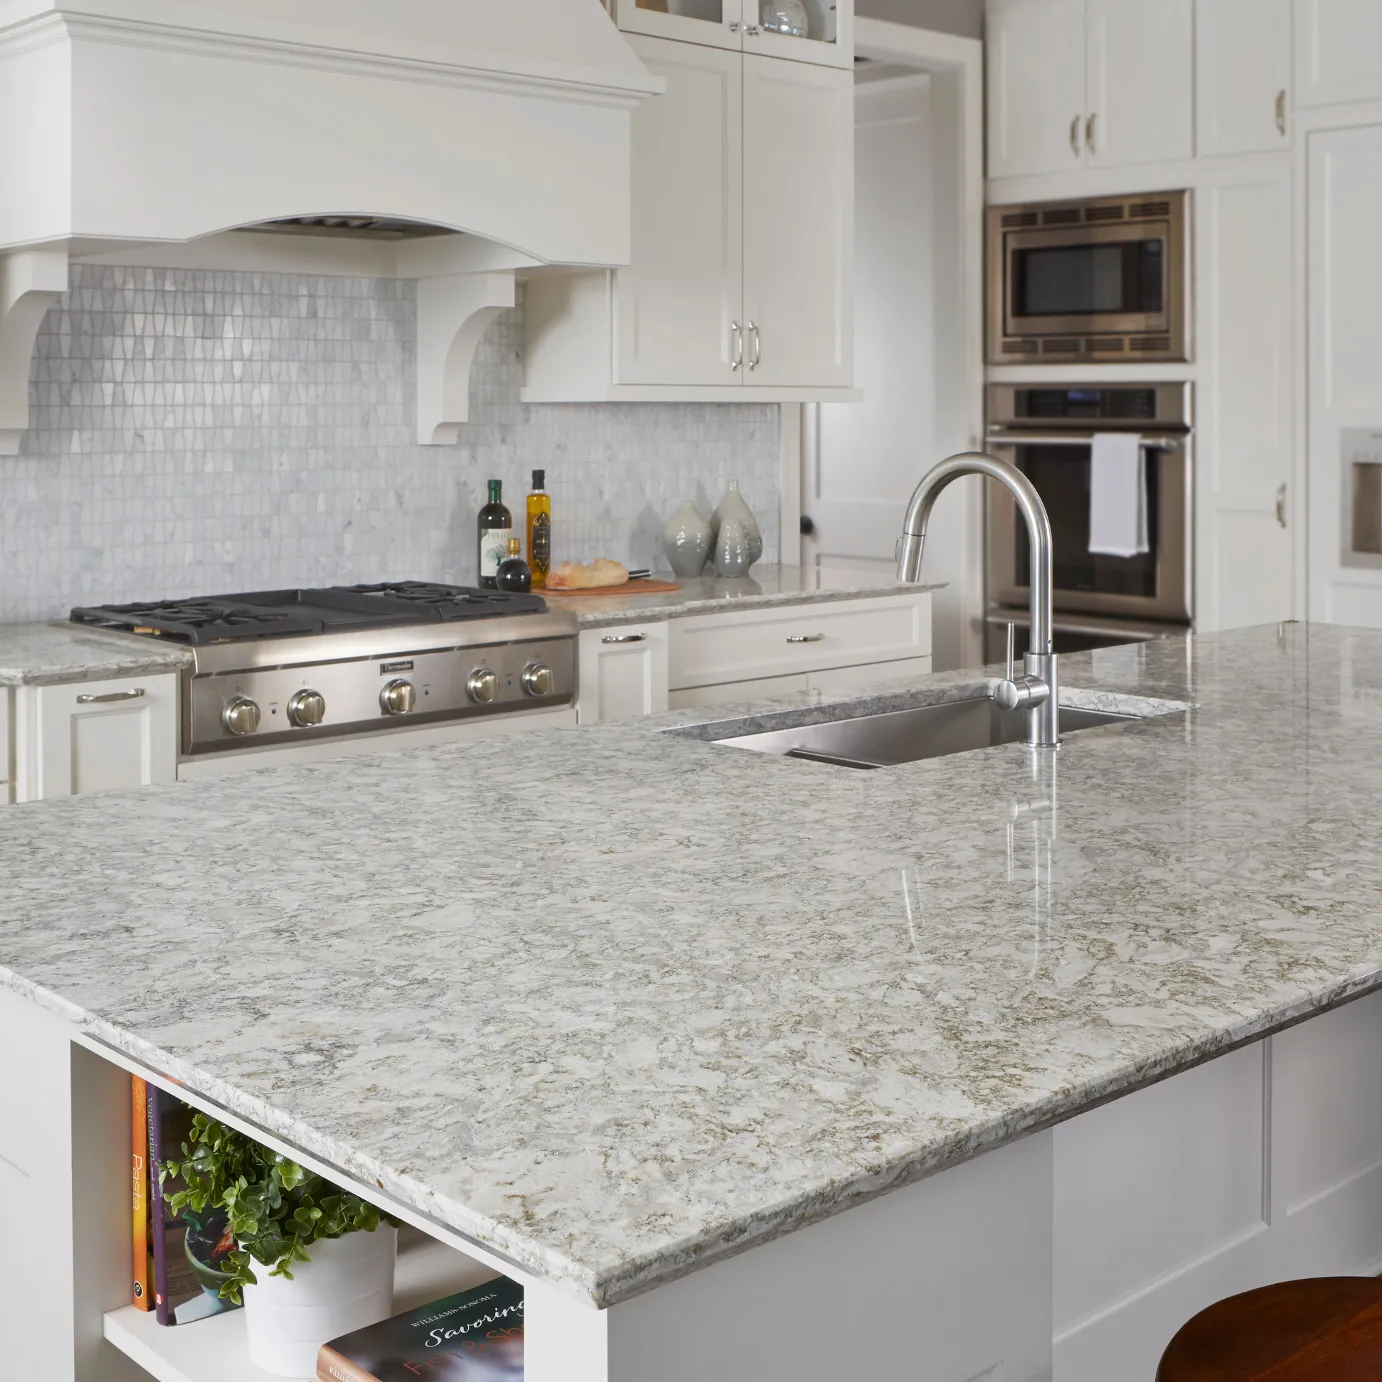 5 Benefits of Granite Countertops for Your Kitchen - The Original